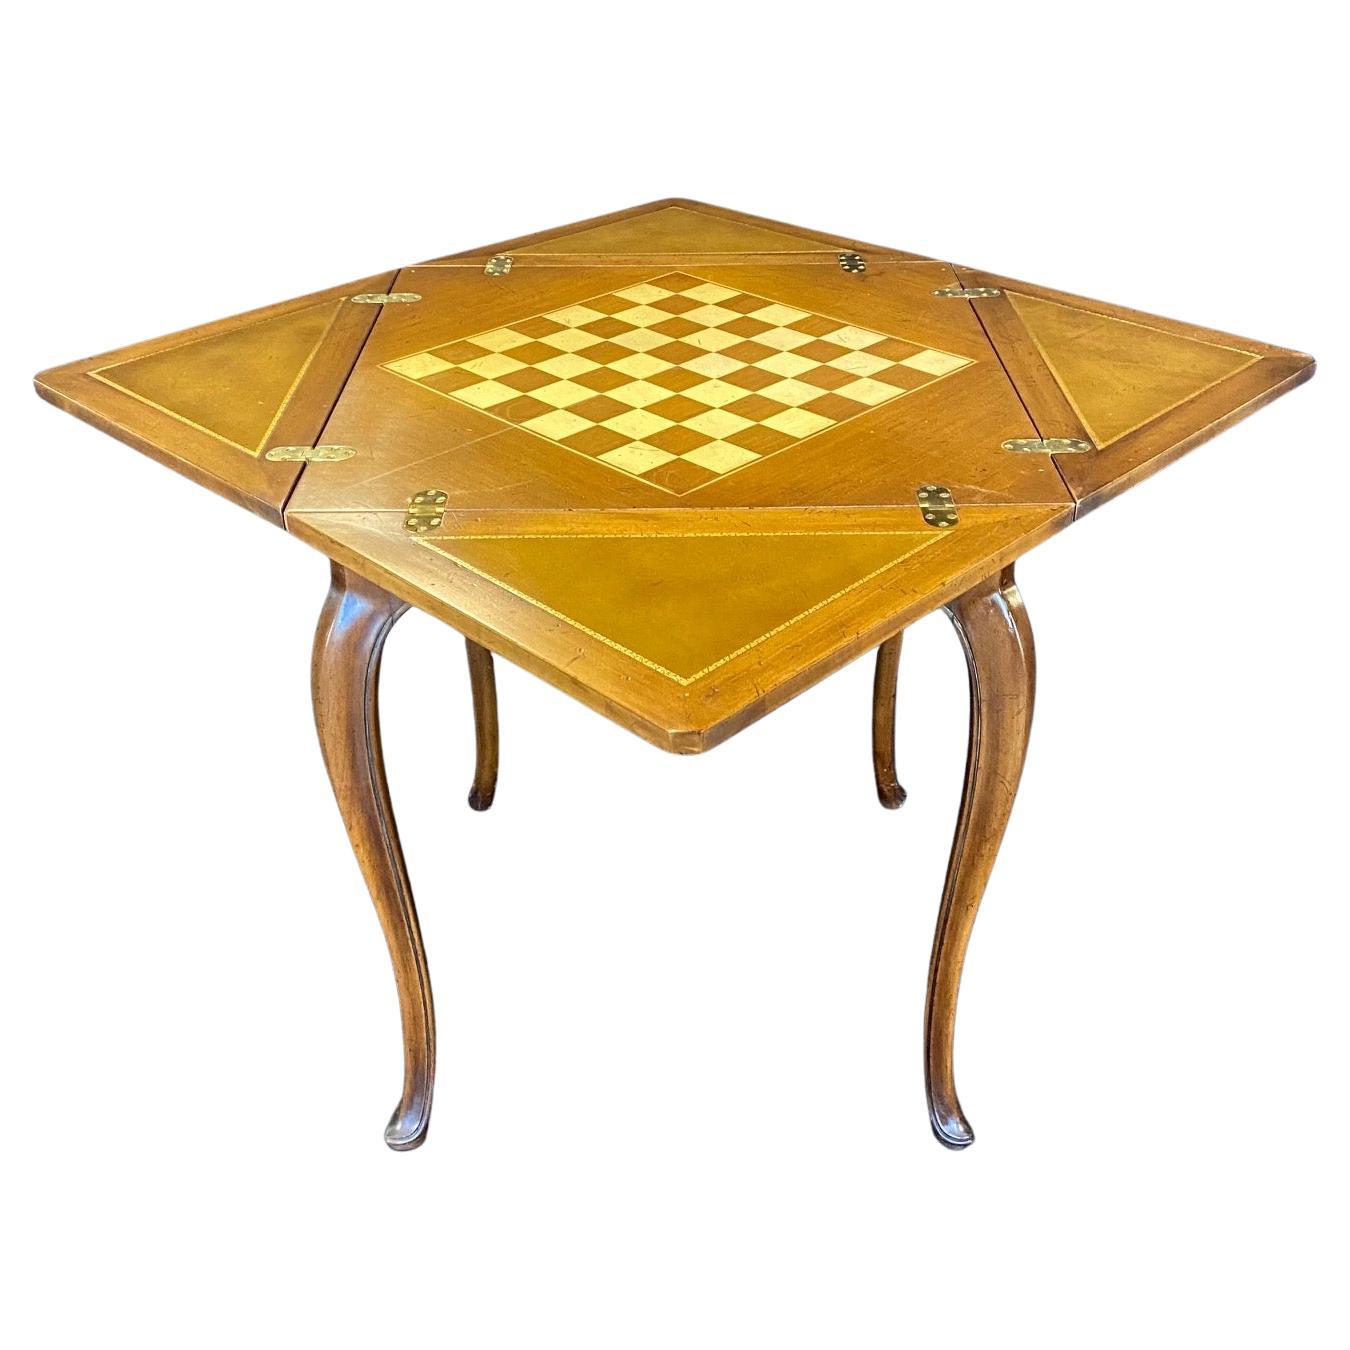 A Classic French Louis XV style handkerchief card table that cleverly transforms from a narrower side table into a square gaming surface with embossed leather leaves, all supported by slender and elegant cabriole legs. All moving parts function